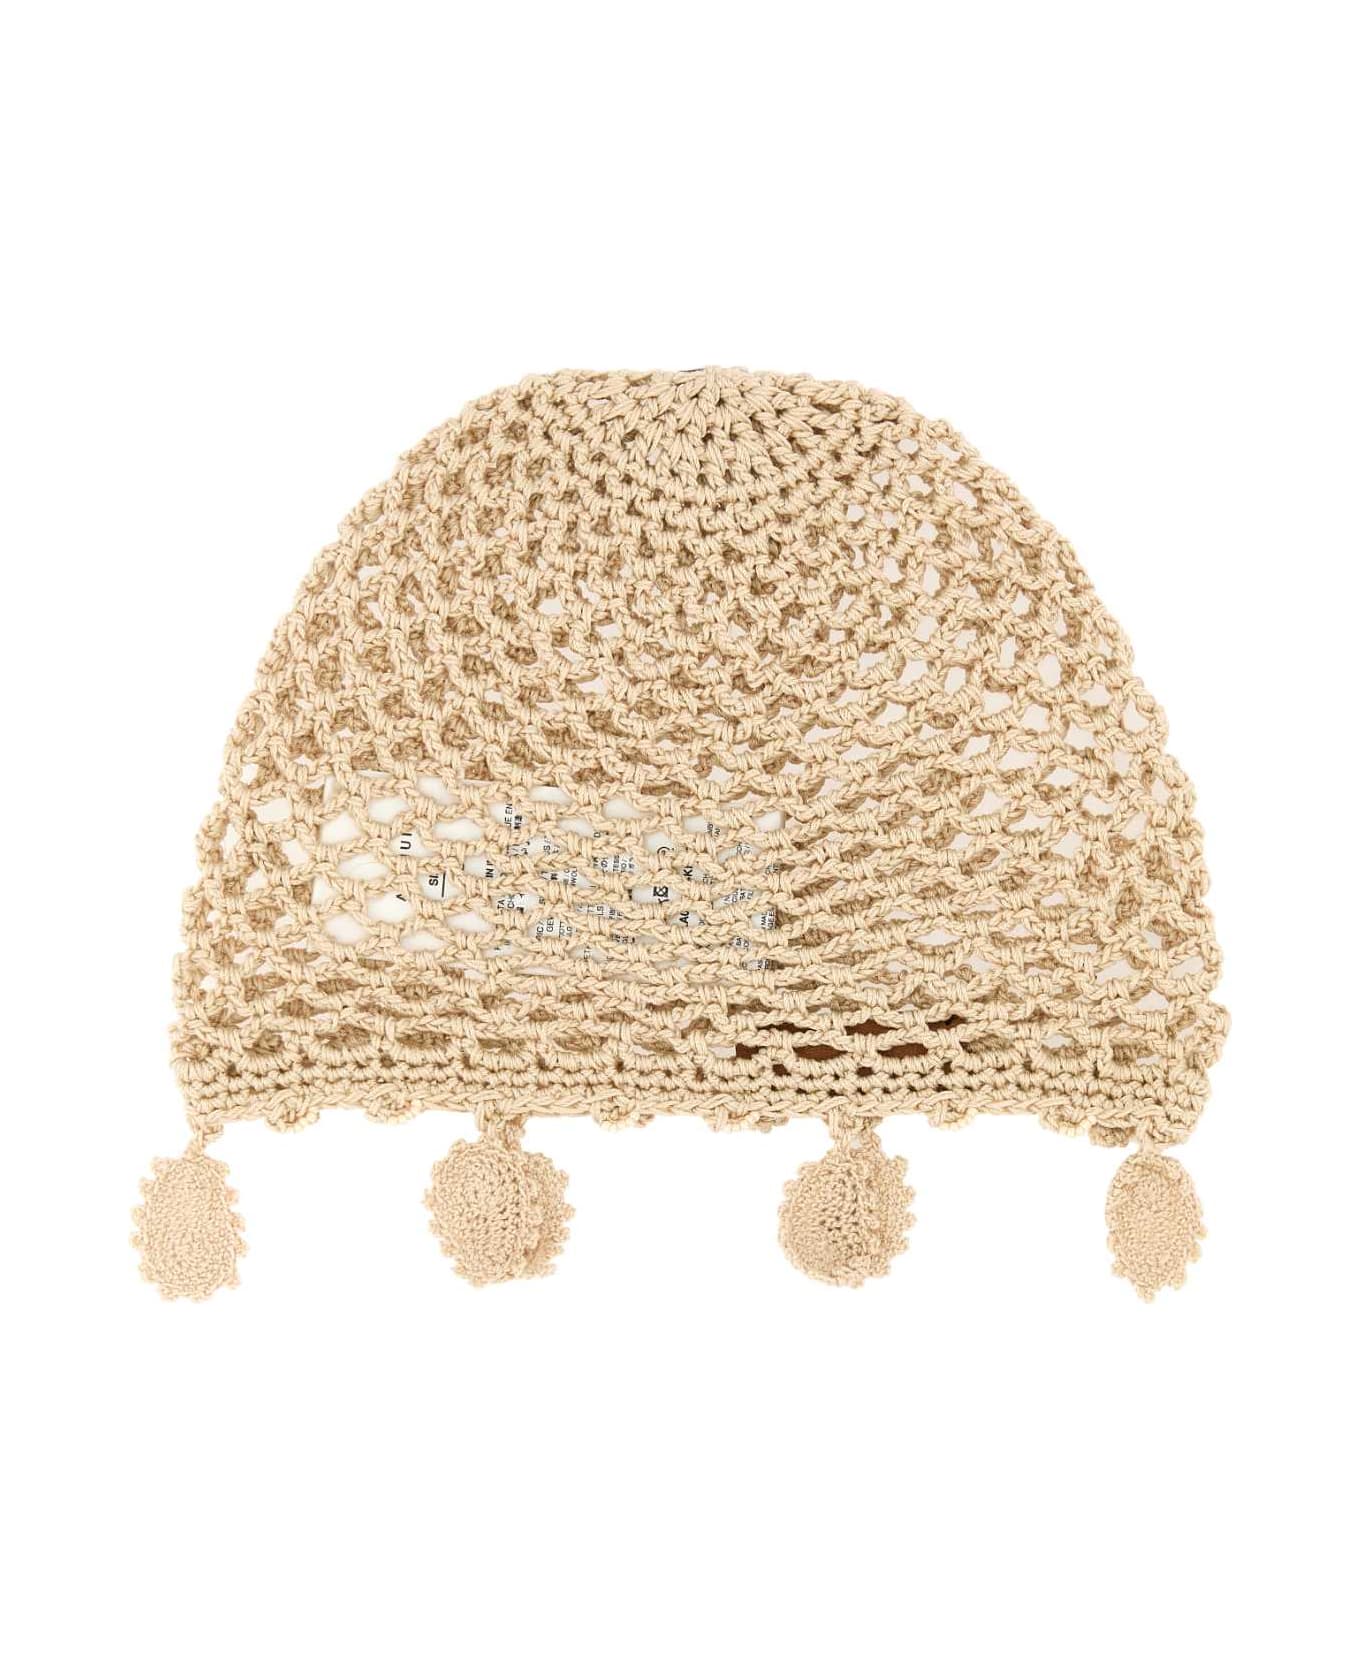 Alanui Sand Crochet Love Letter To India Hat - 0300